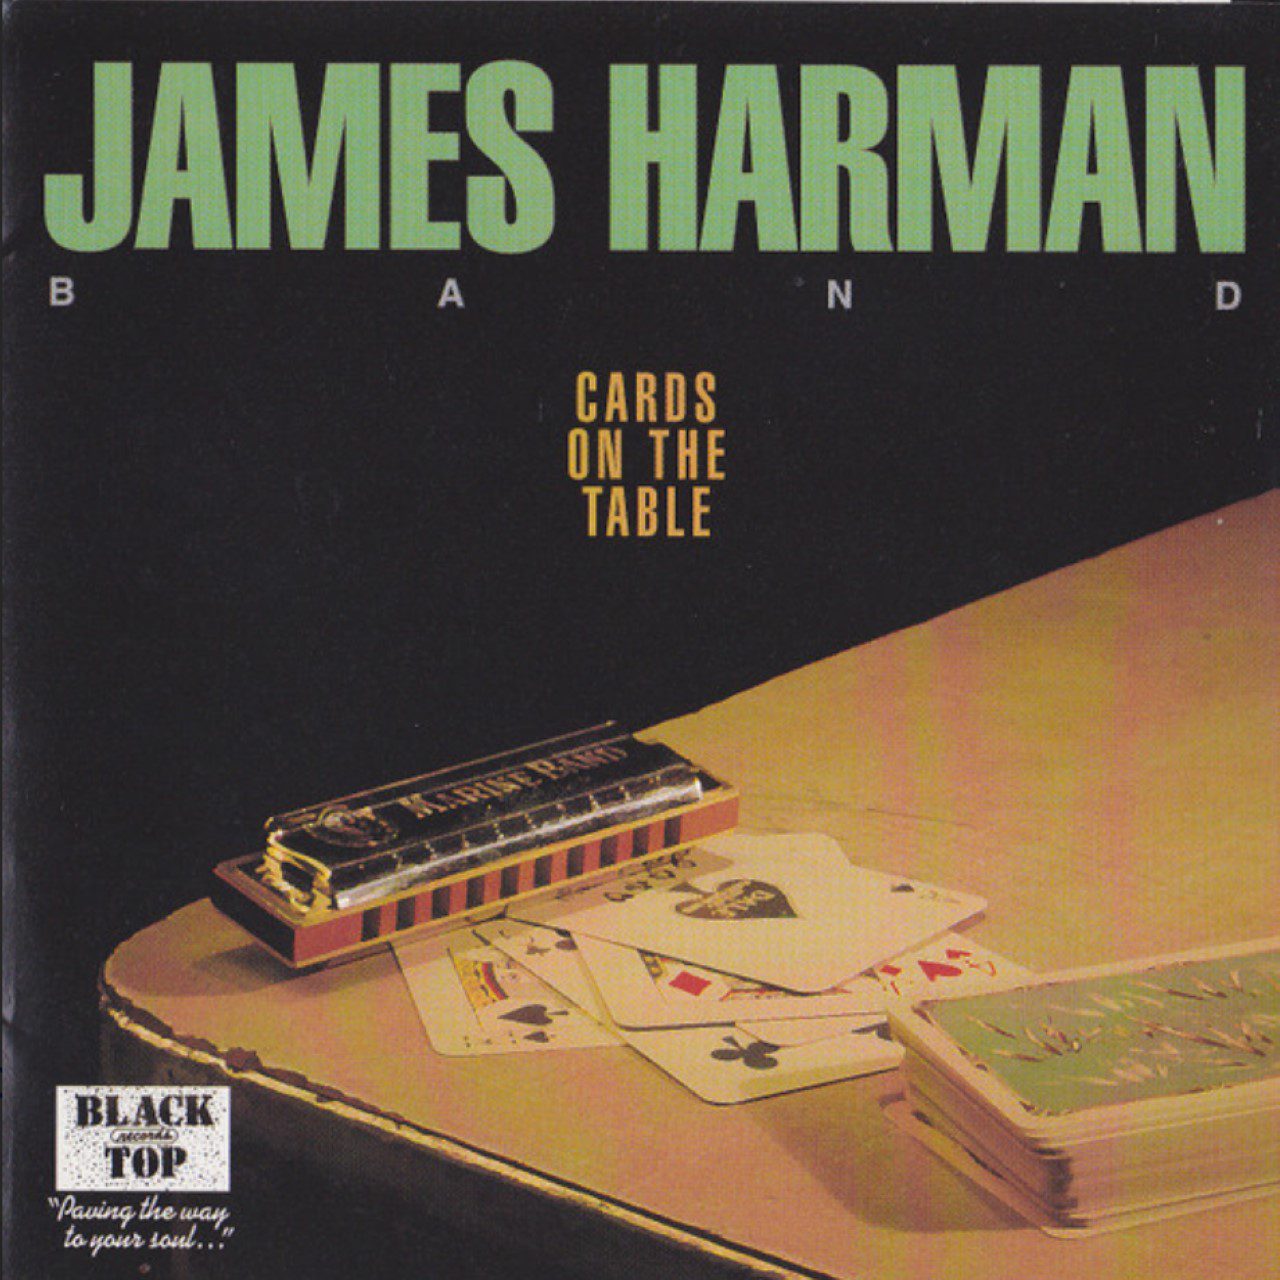 James Harman Band – Cards On The Table cover album